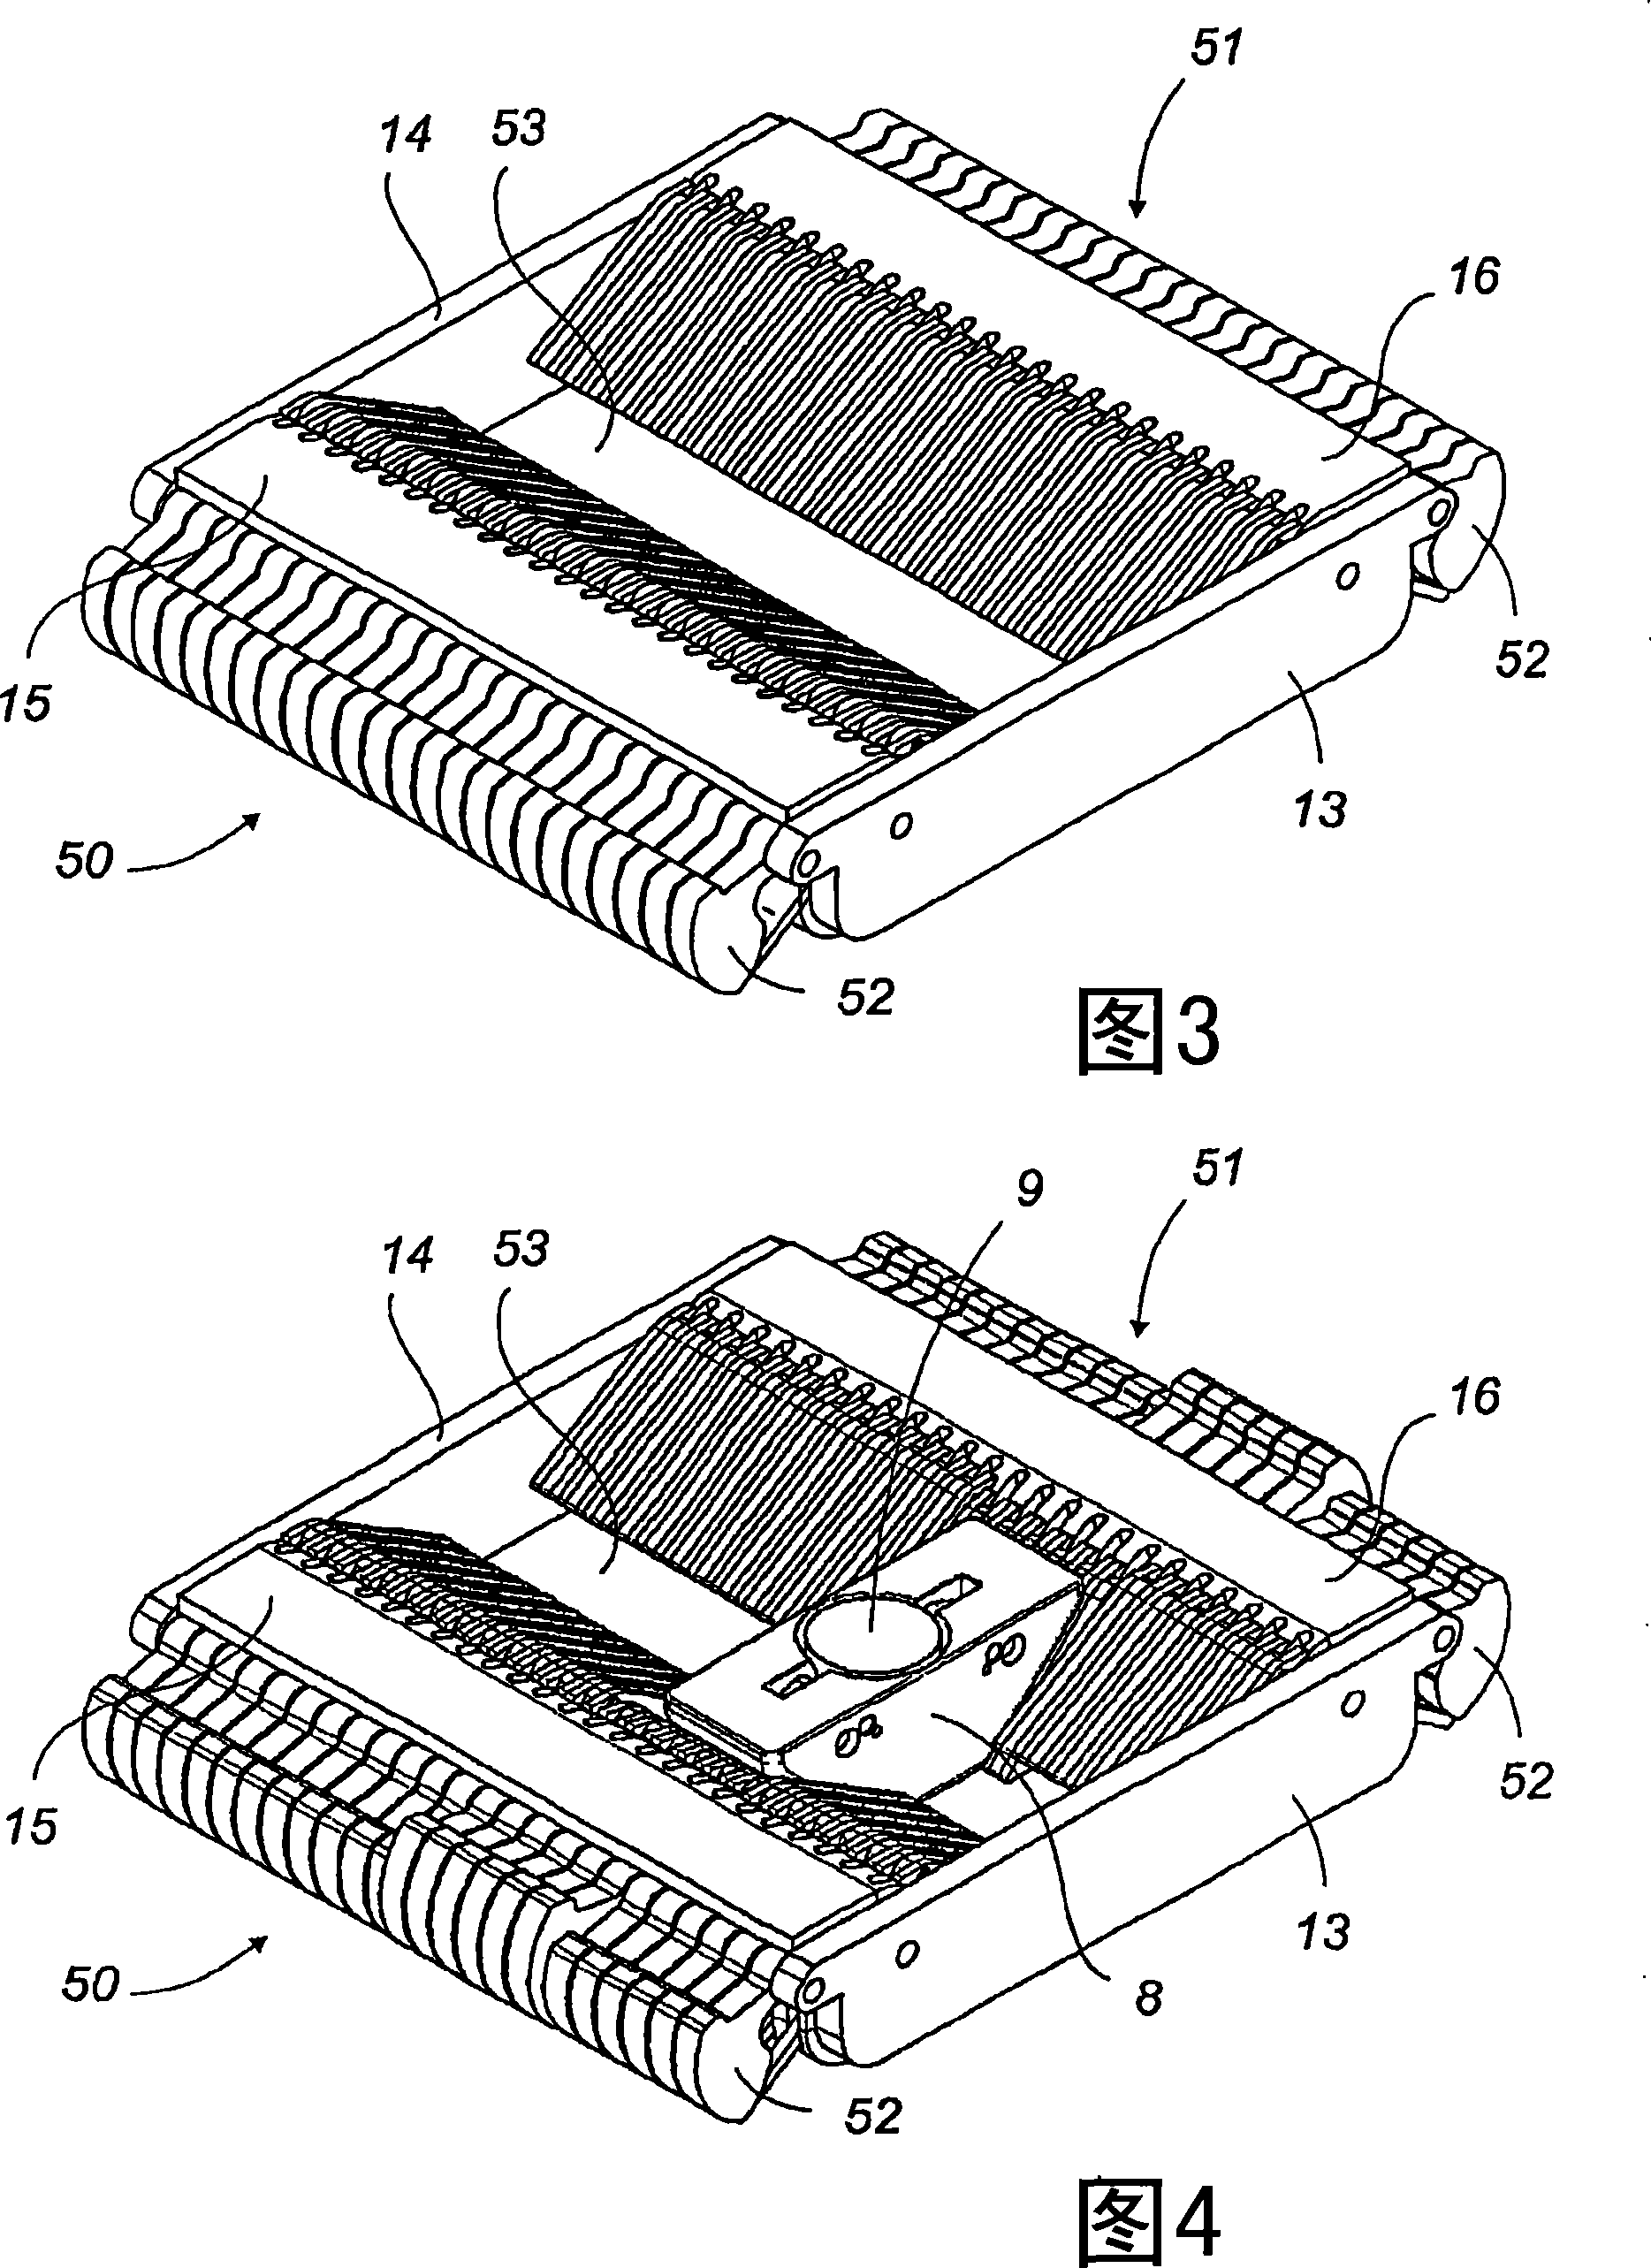 Device for lateral self-centering support and immobilization on a railway structure of a semi-trailer kingpin